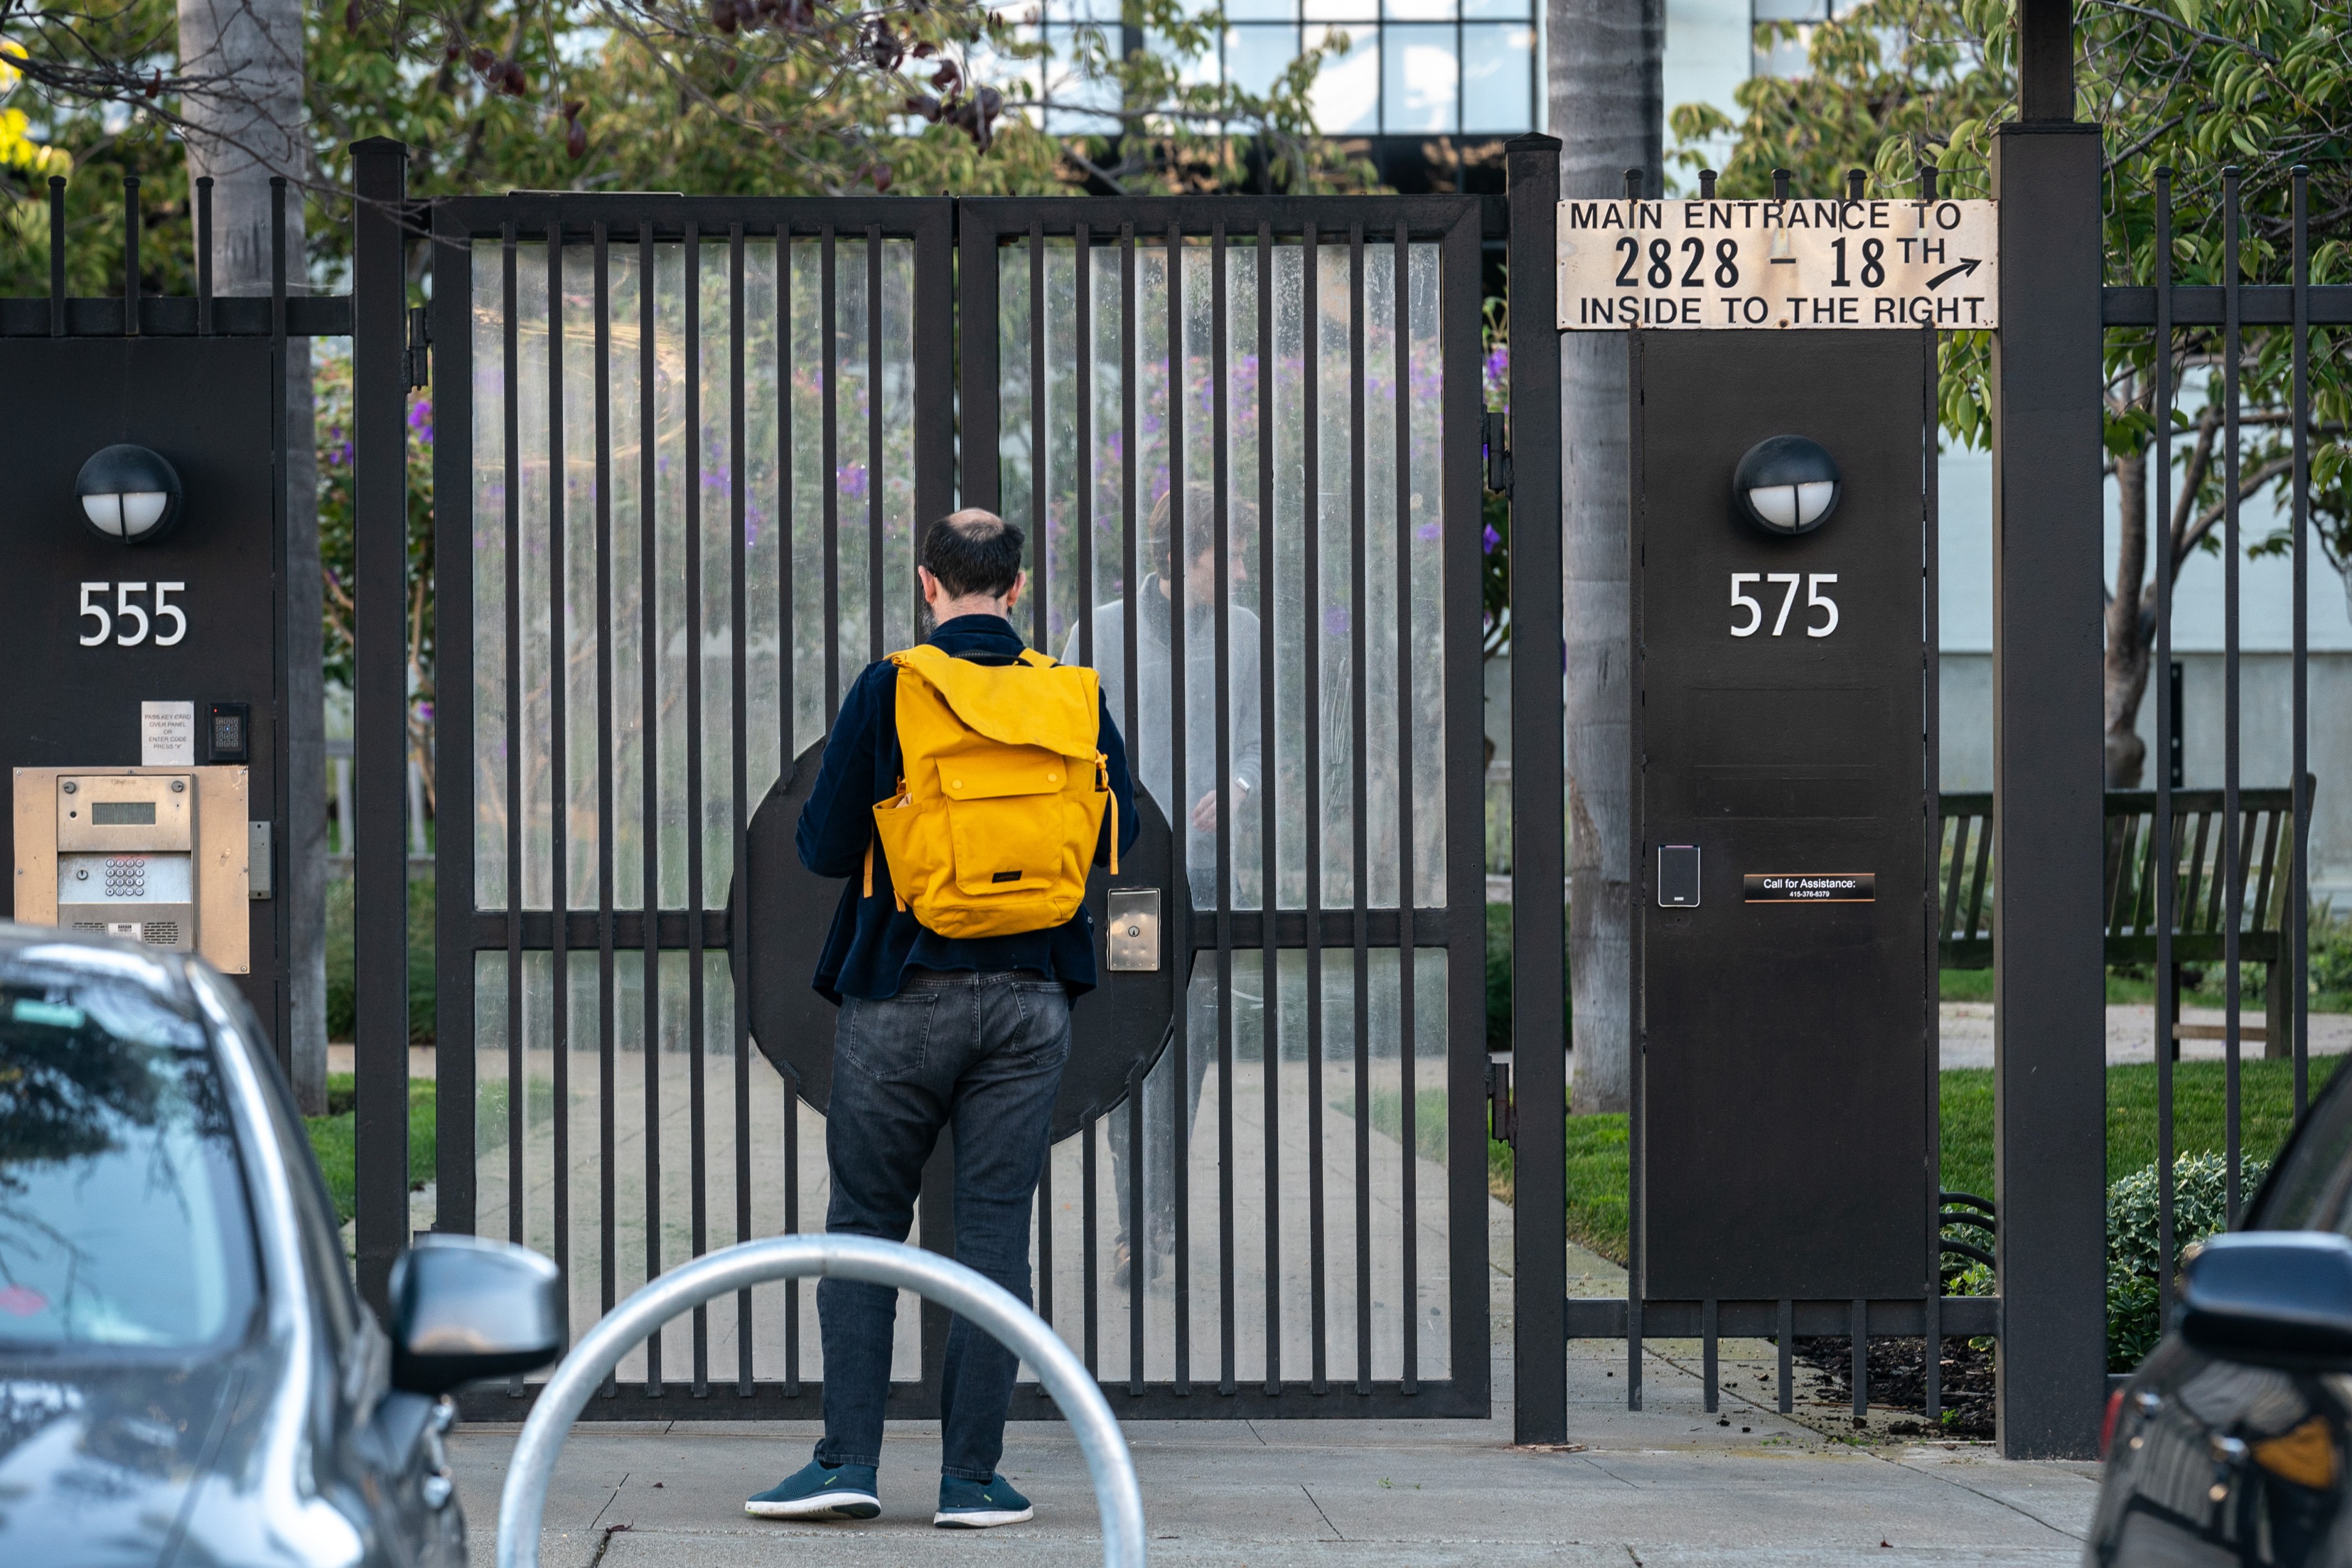 A person wearing a yellow backpack enters a large gated entrance with the street numbers 555 and 575 on the posts